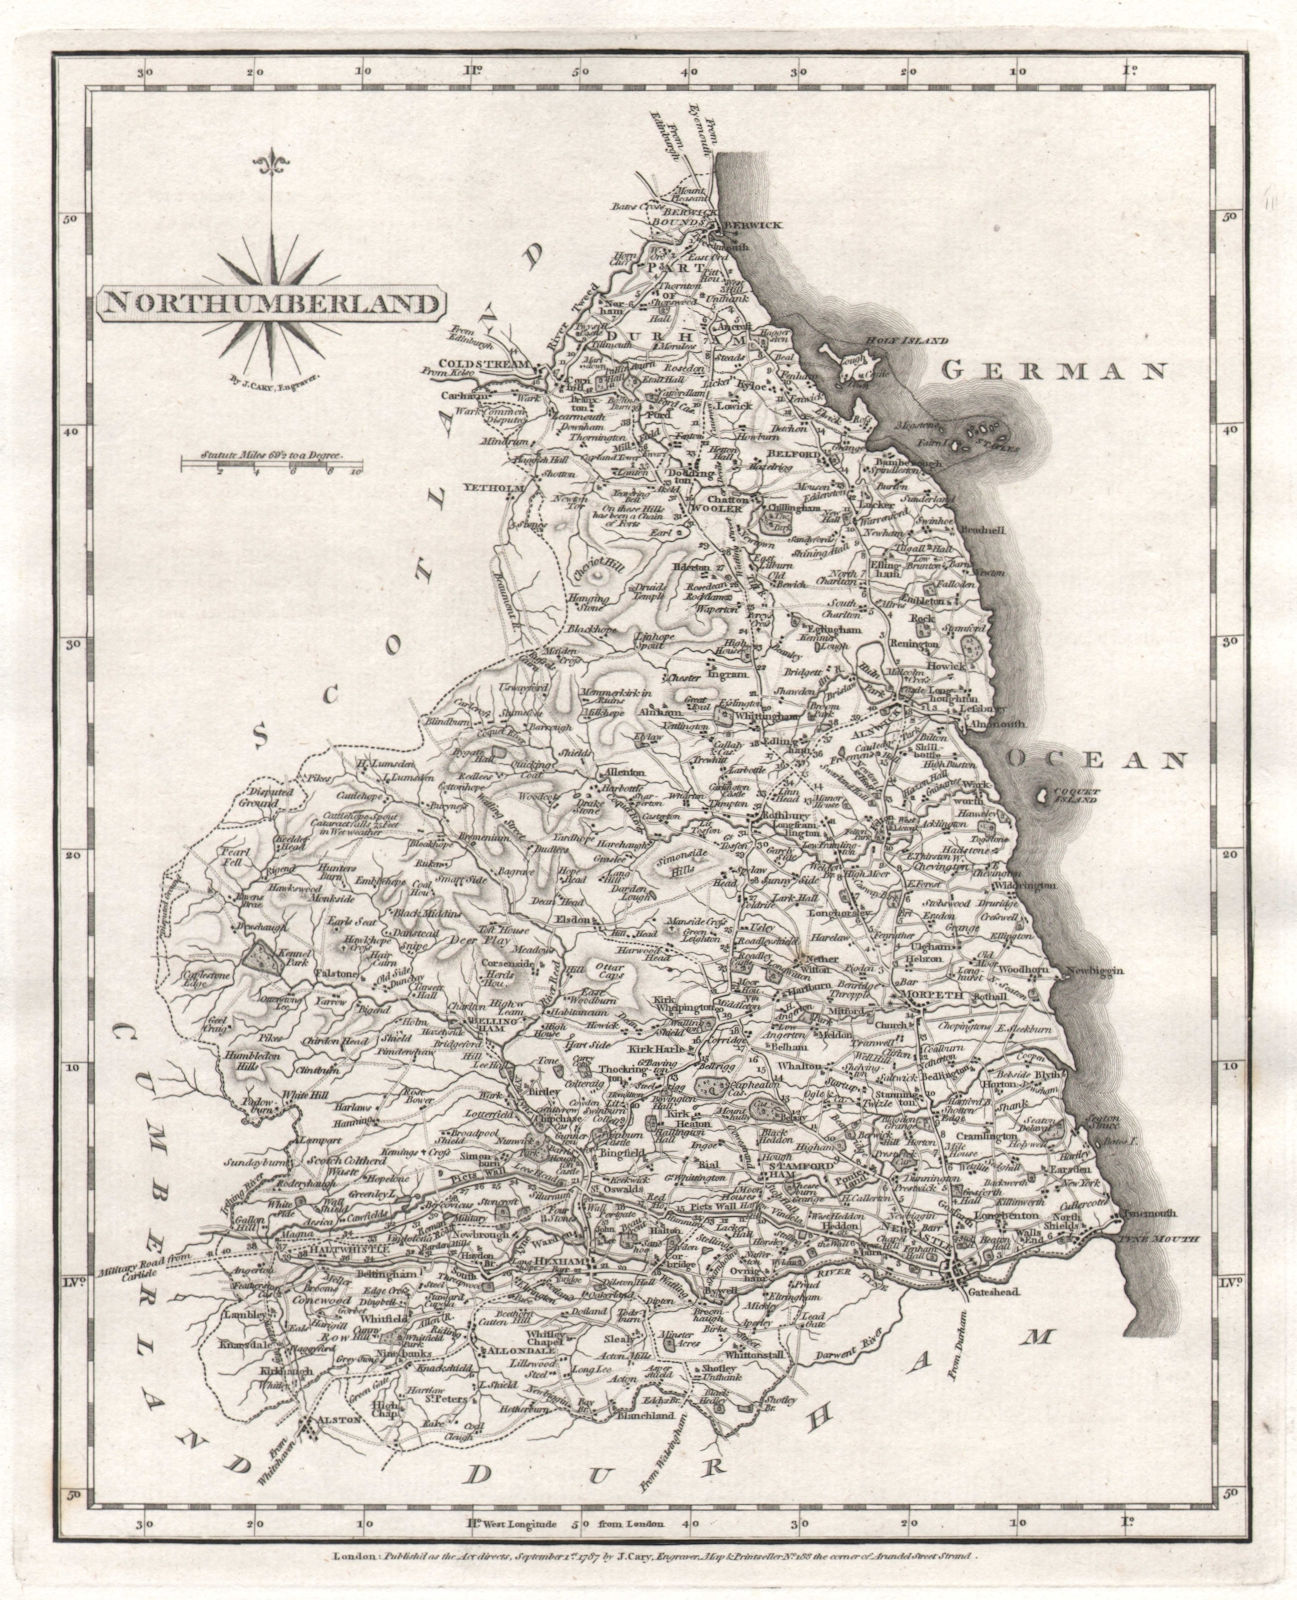 Antique county map of NORTHUMBERLAND by JOHN CARY 1787 old chart